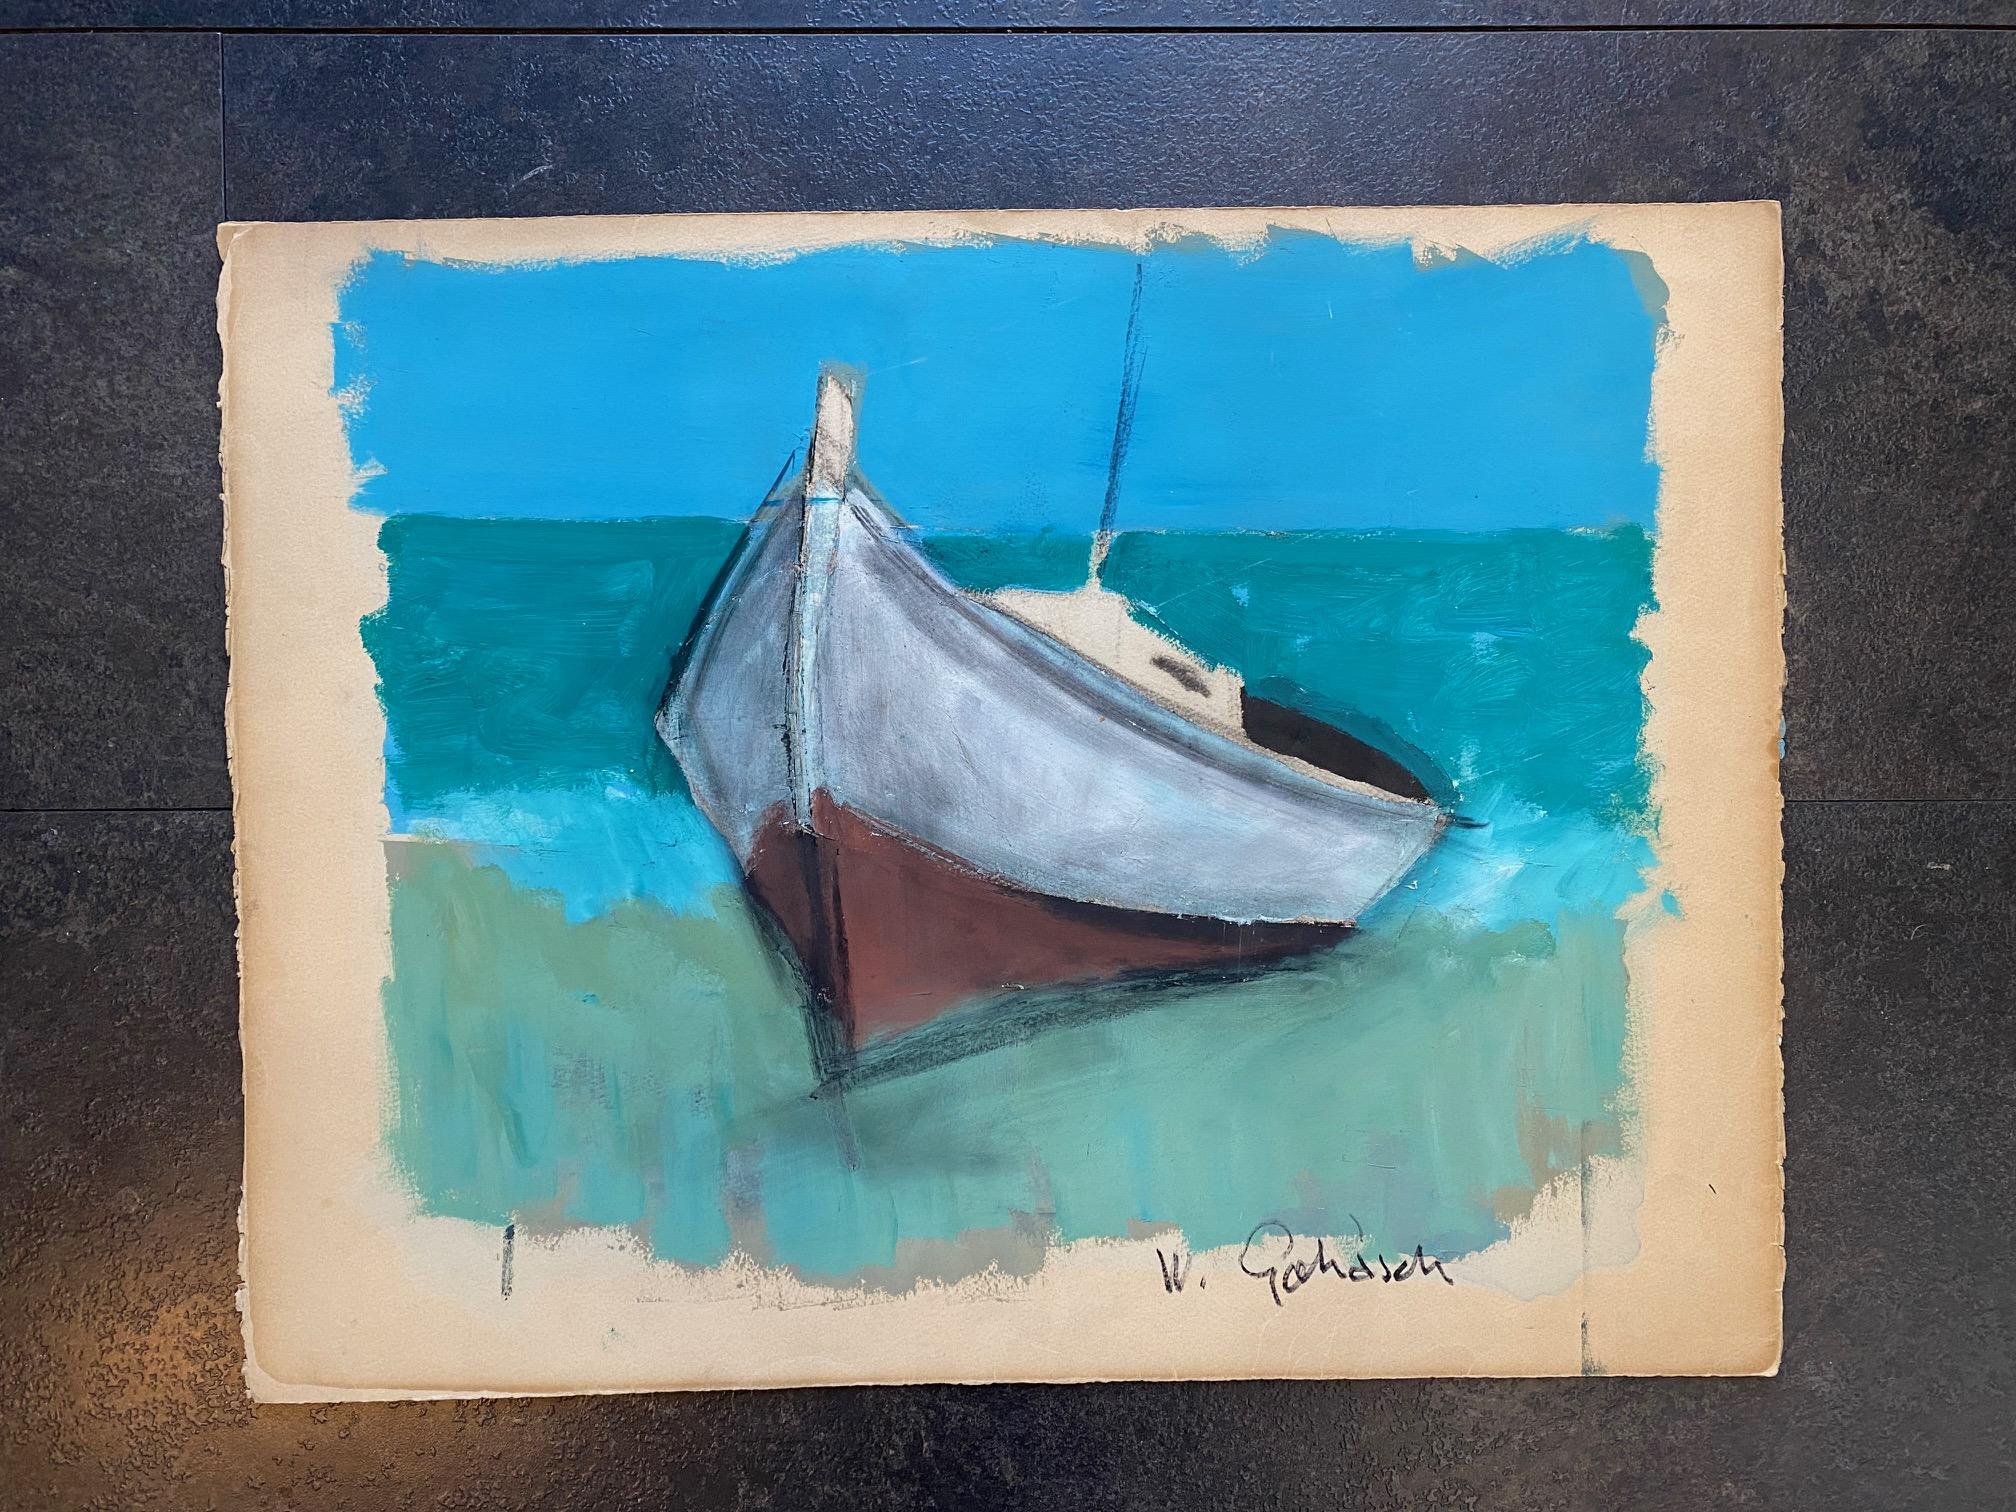 Boat in motion - Painting by William Goliasch